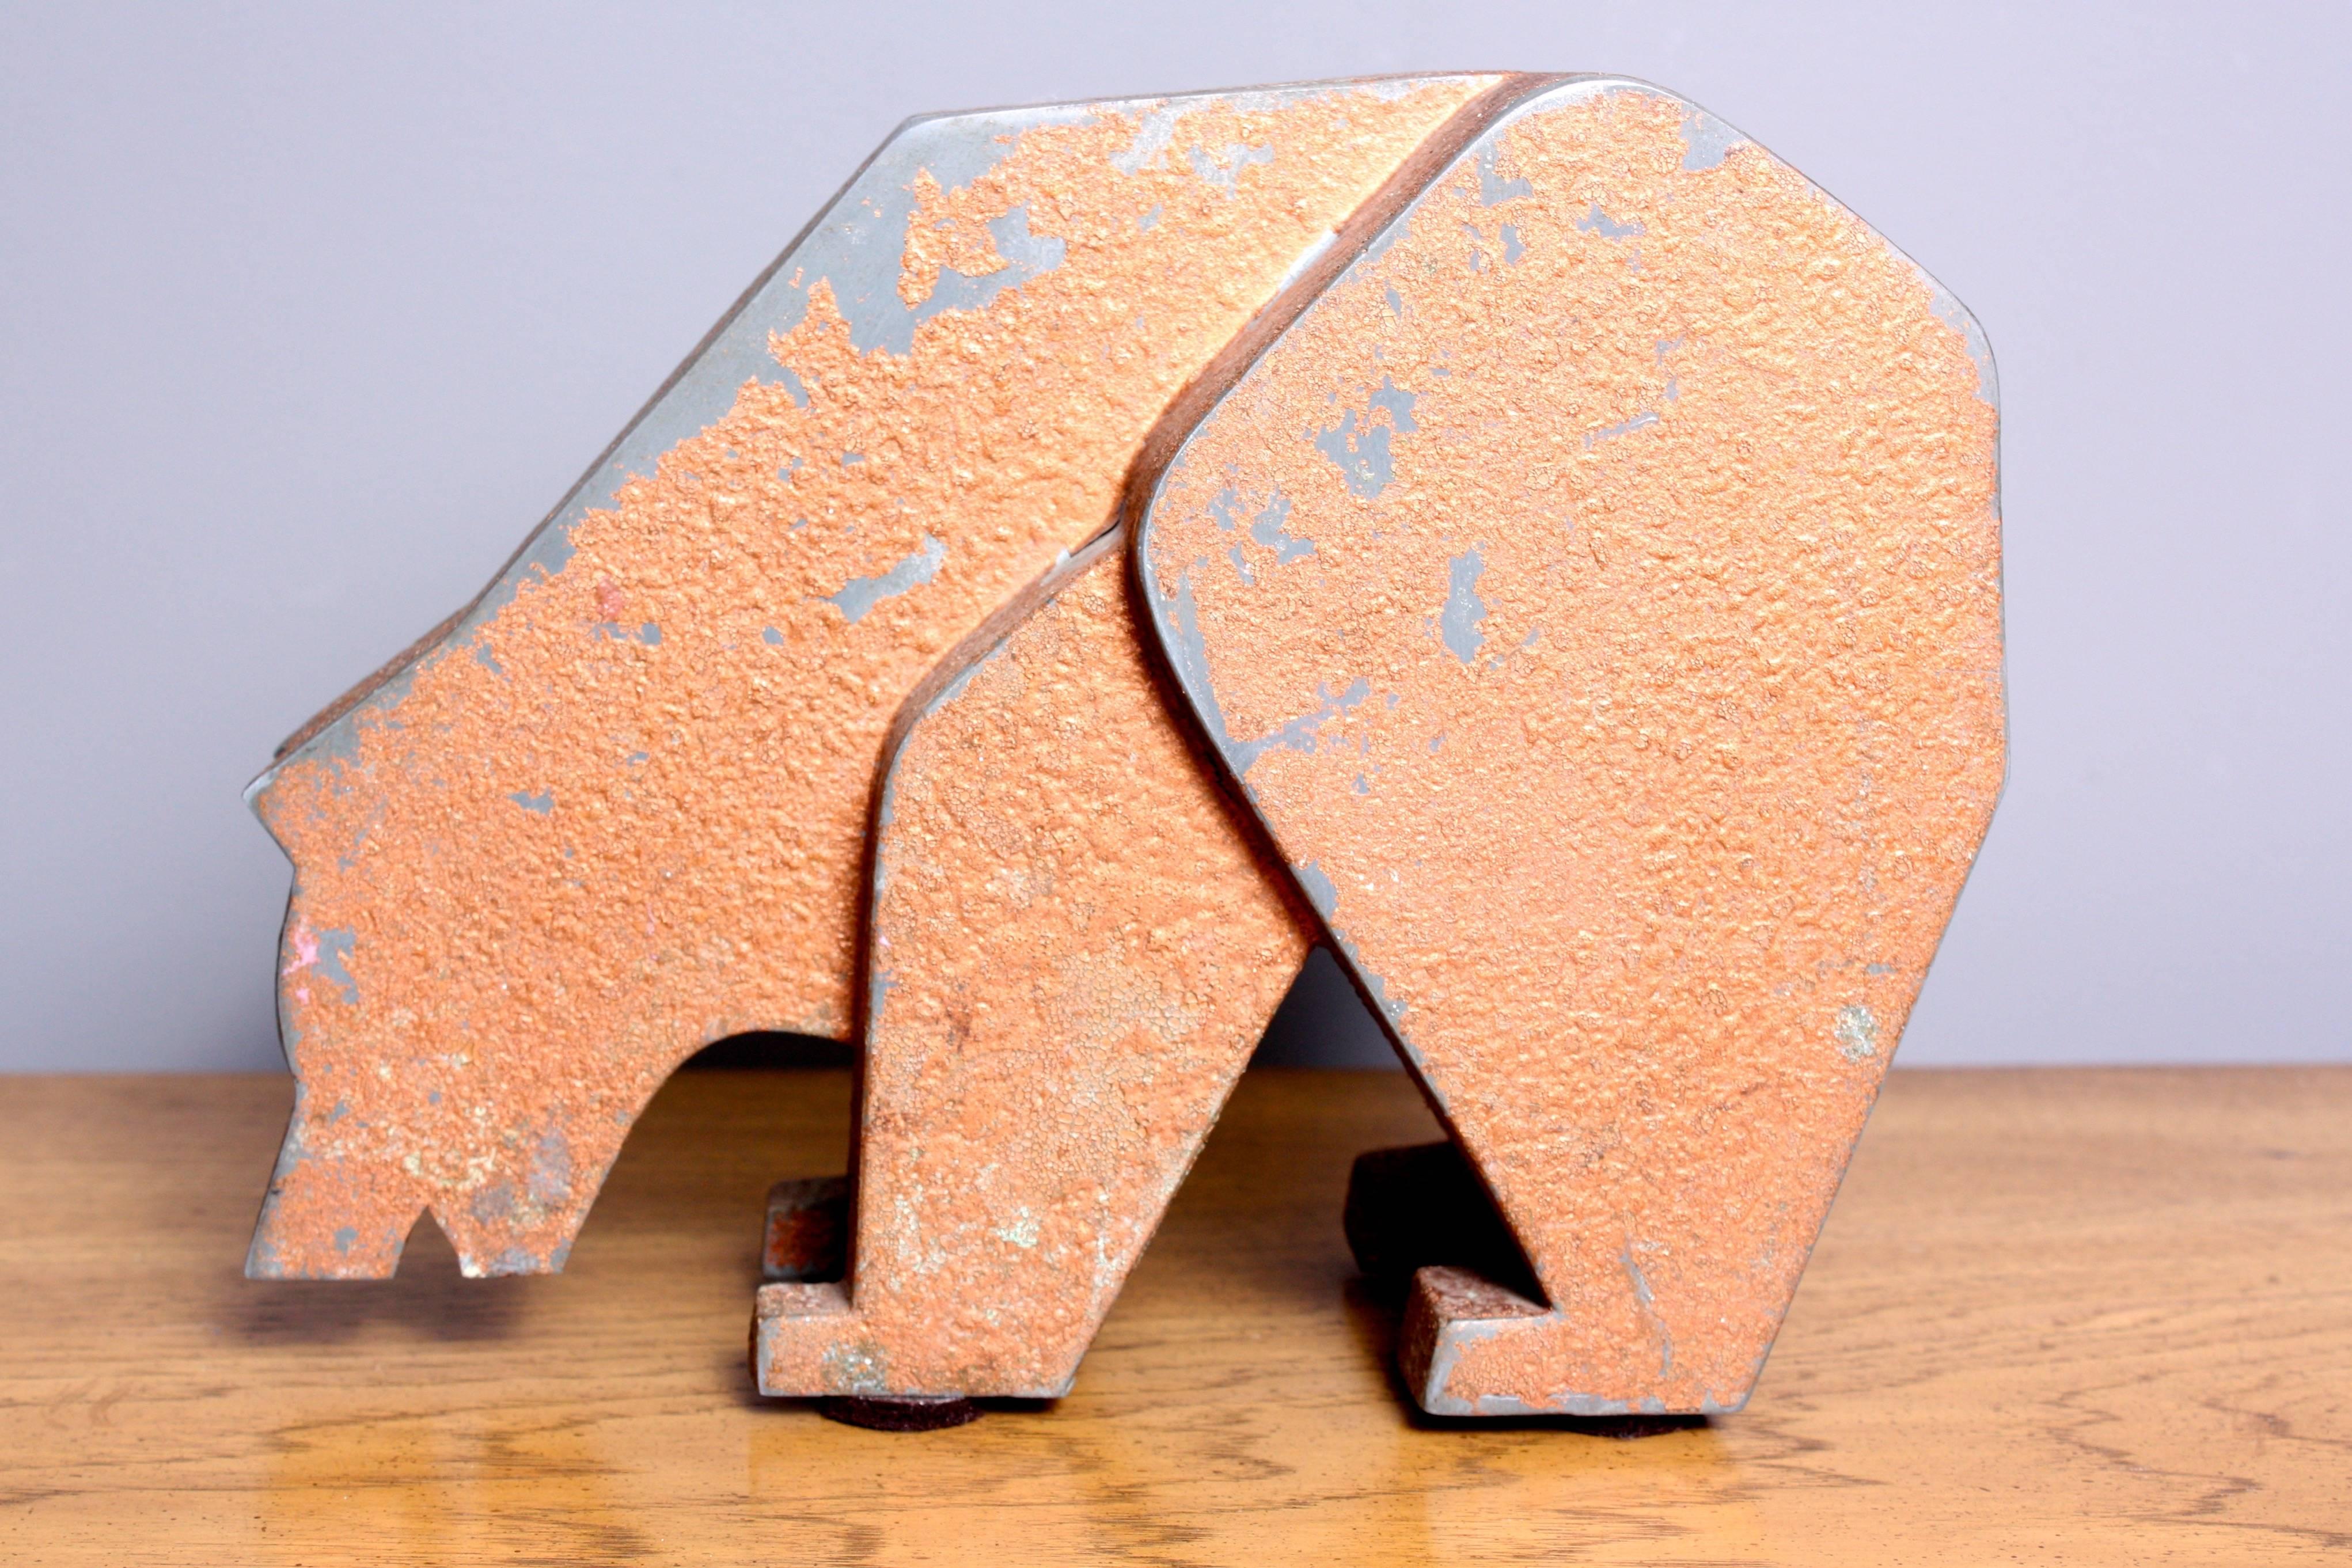 This metal bear was said to be mounted outside a retail store as an advertising piece. This charming store display features a textured gold aluminum coating. Although it's not clear exactly what merchandise this bear represents, this unique and